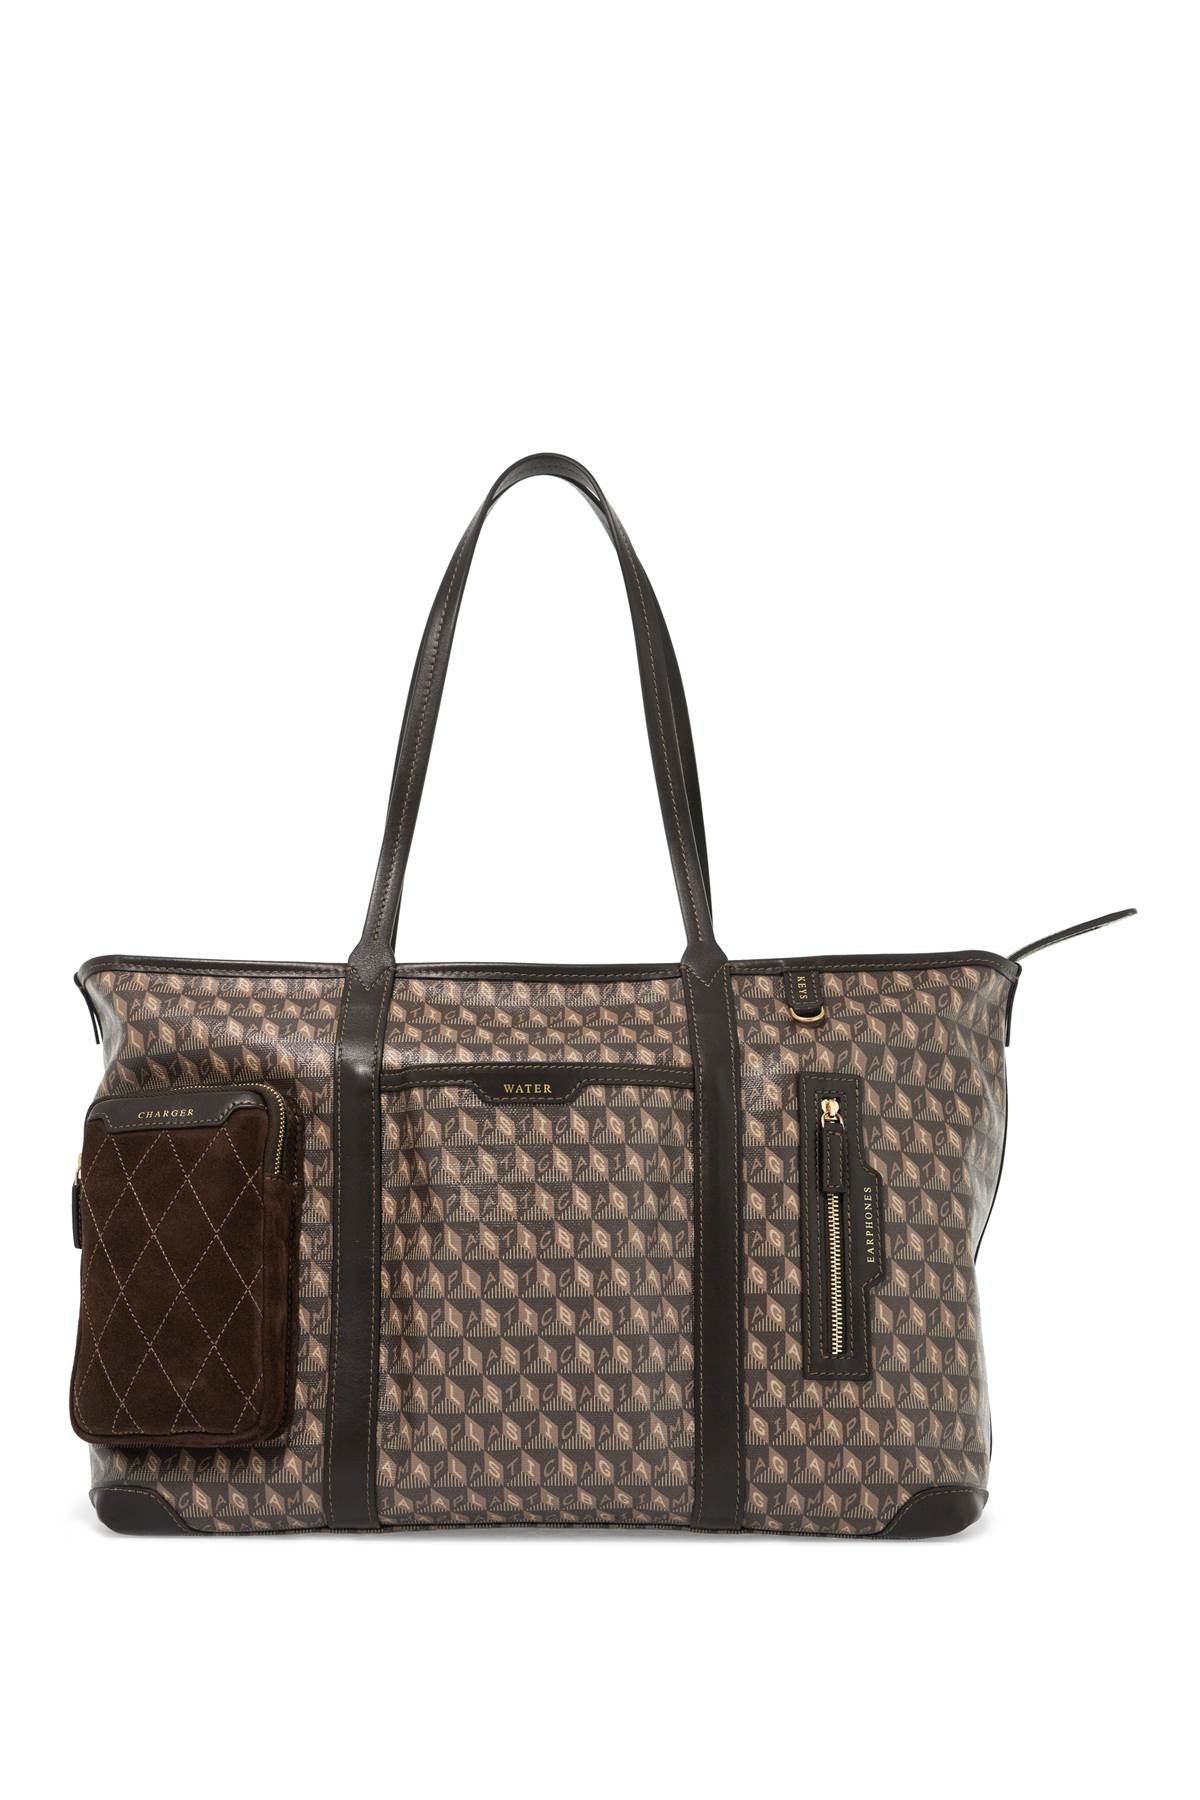 Anya Hindmarch I Am A Plastic Bag In-flight Tote In Marrone